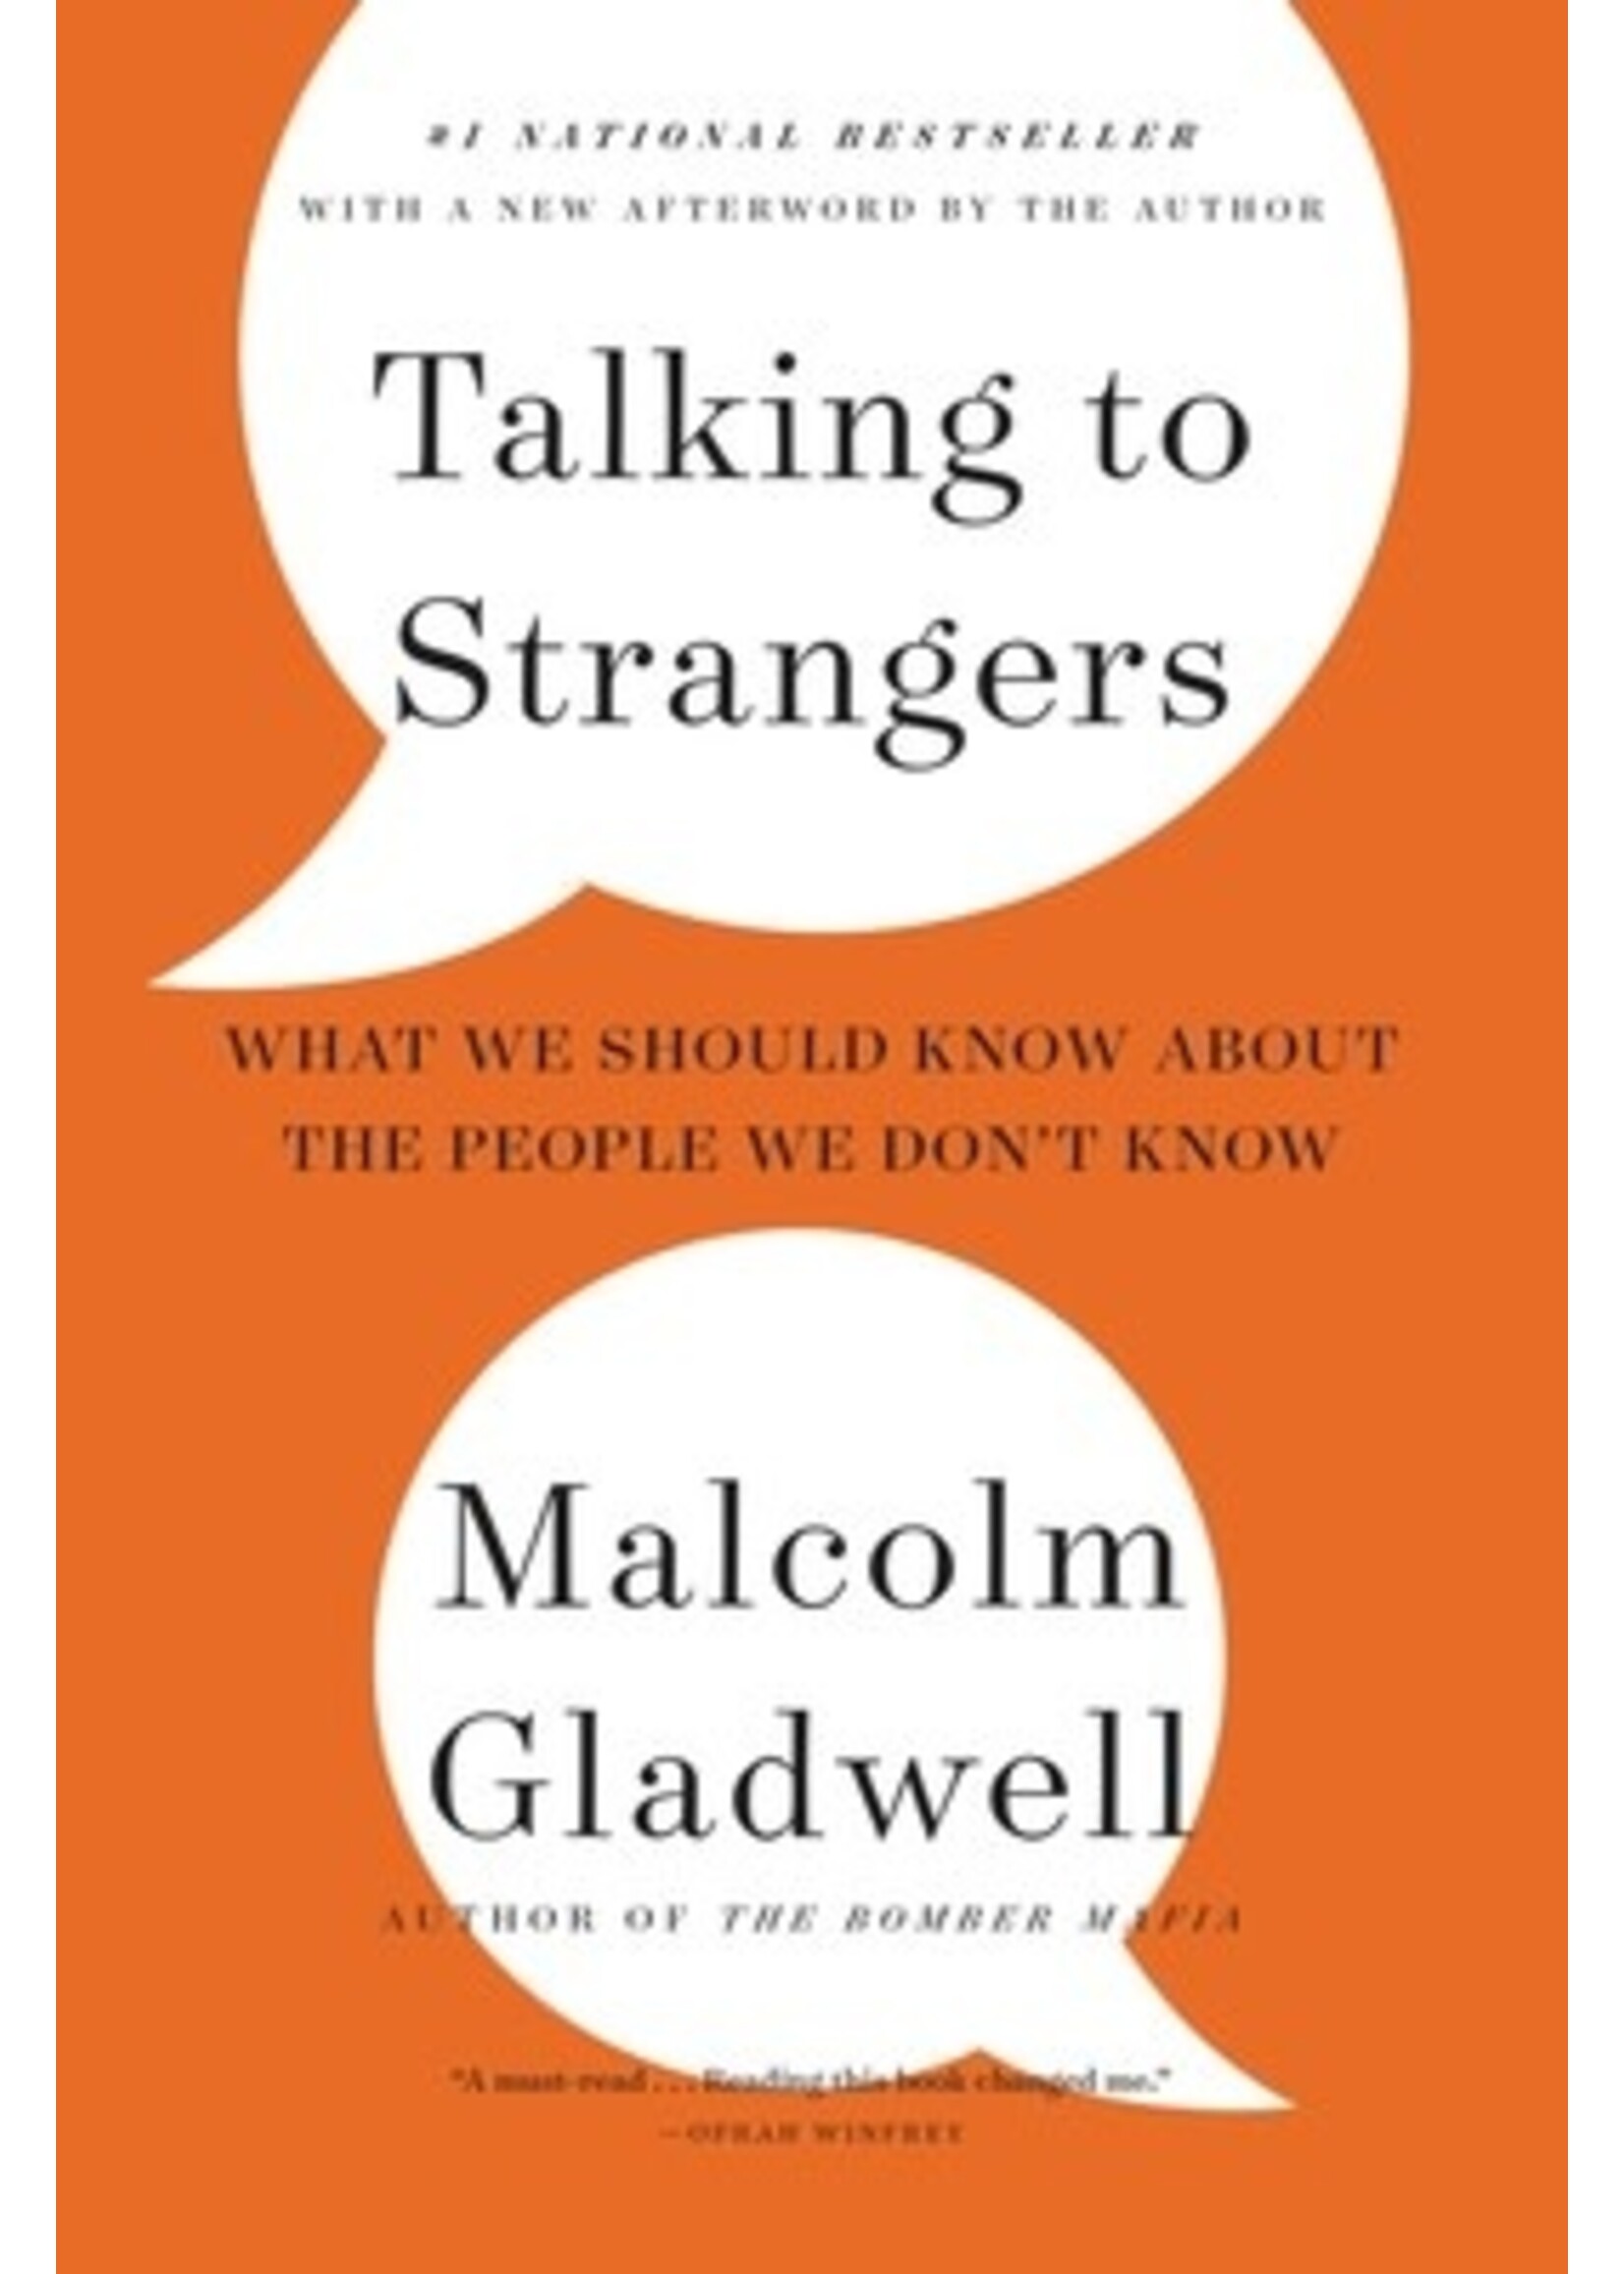 Talking to strangers: What We Should Know About the People We Don't Know by Malcolm Gladwell